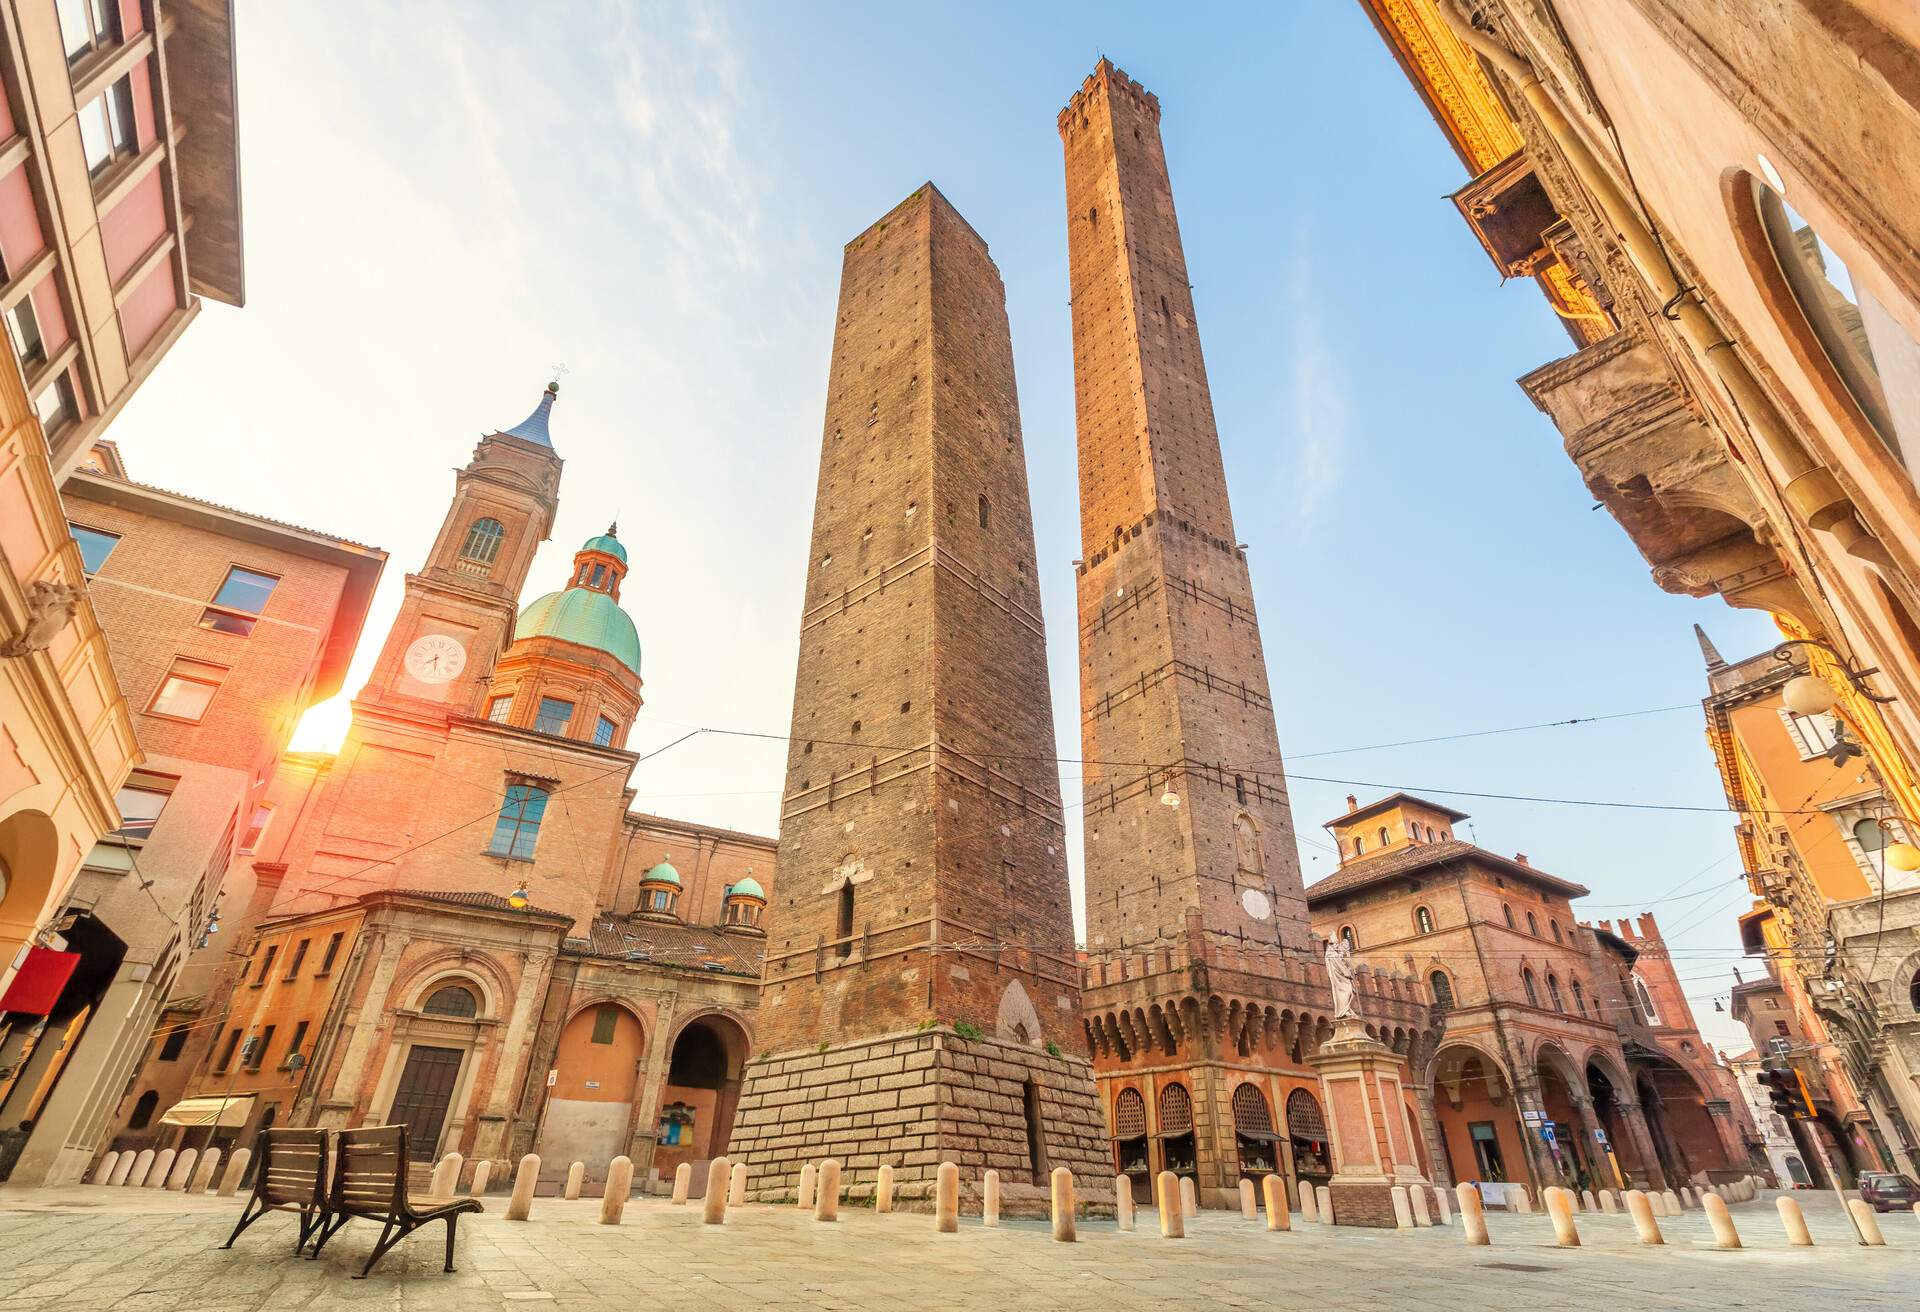 The iconic leaning towers of Asinelli and Garisenda stand tall in the small square, surrounded by historic buildings, as if frozen in time during their gradual descent.